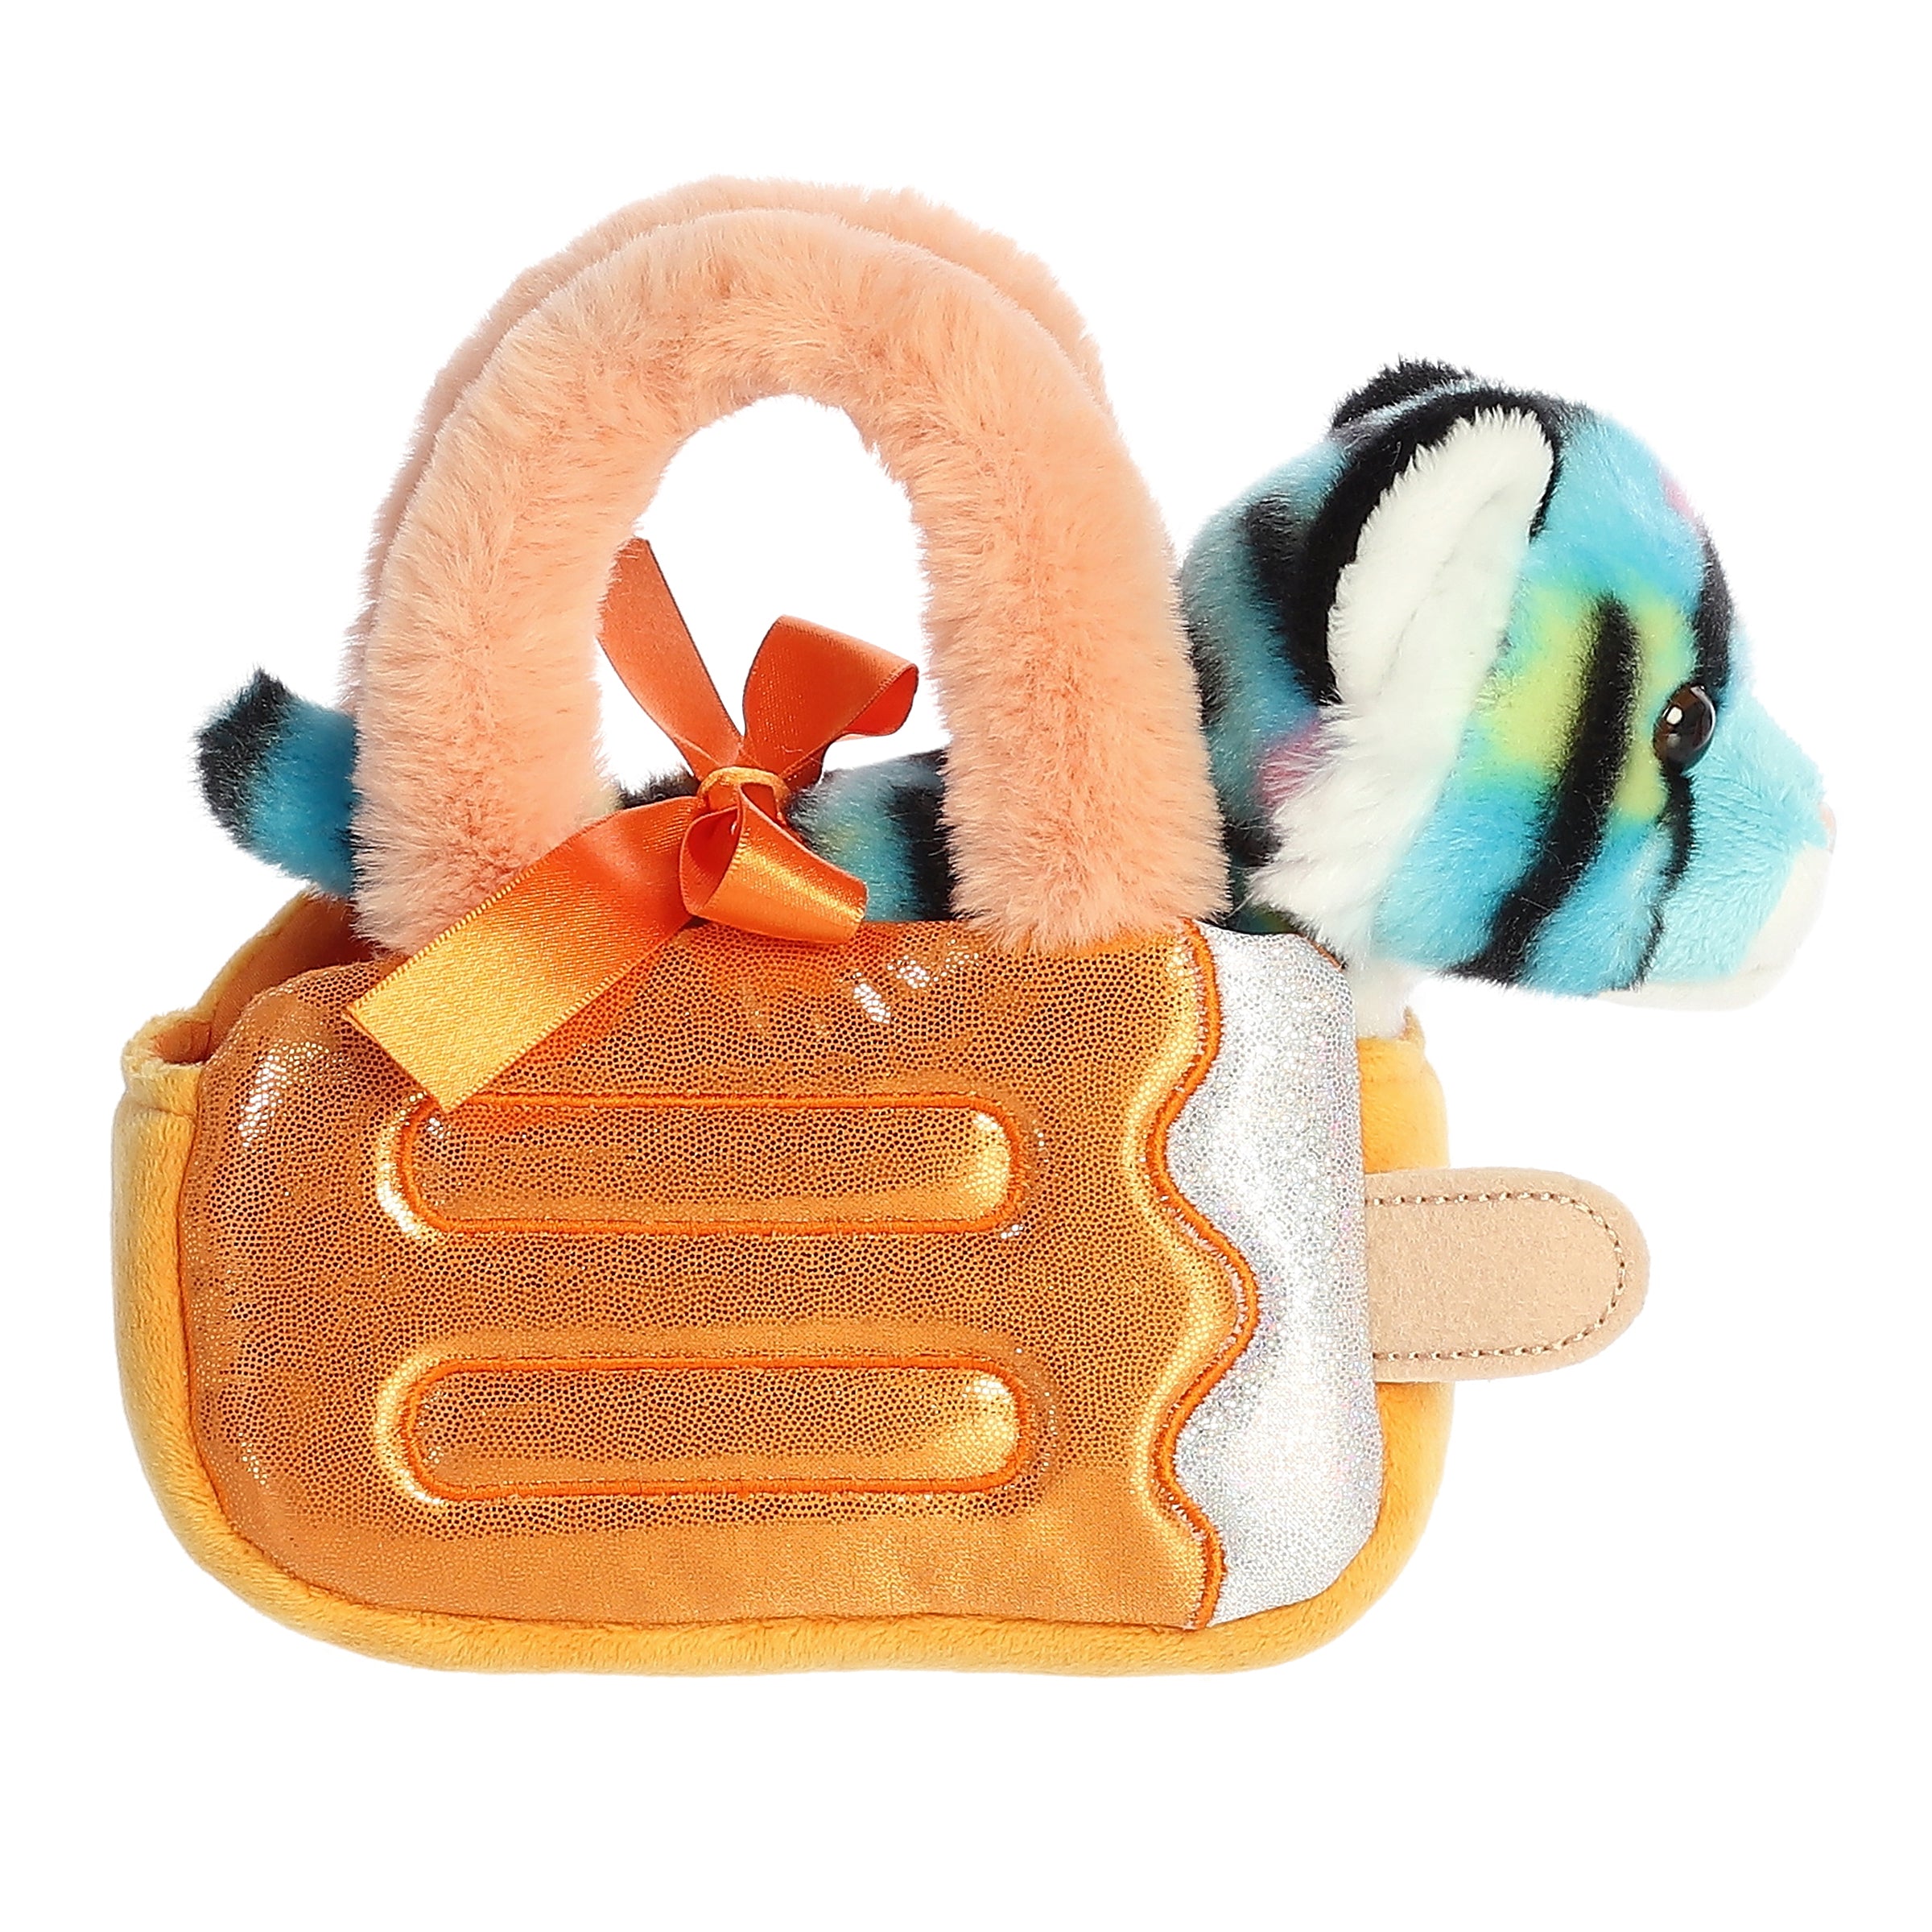 Sparkly orange Dreamsicle plush carrier from Aurora, with a cute blue tiger stuffed animal, ready for whimsical adventures.